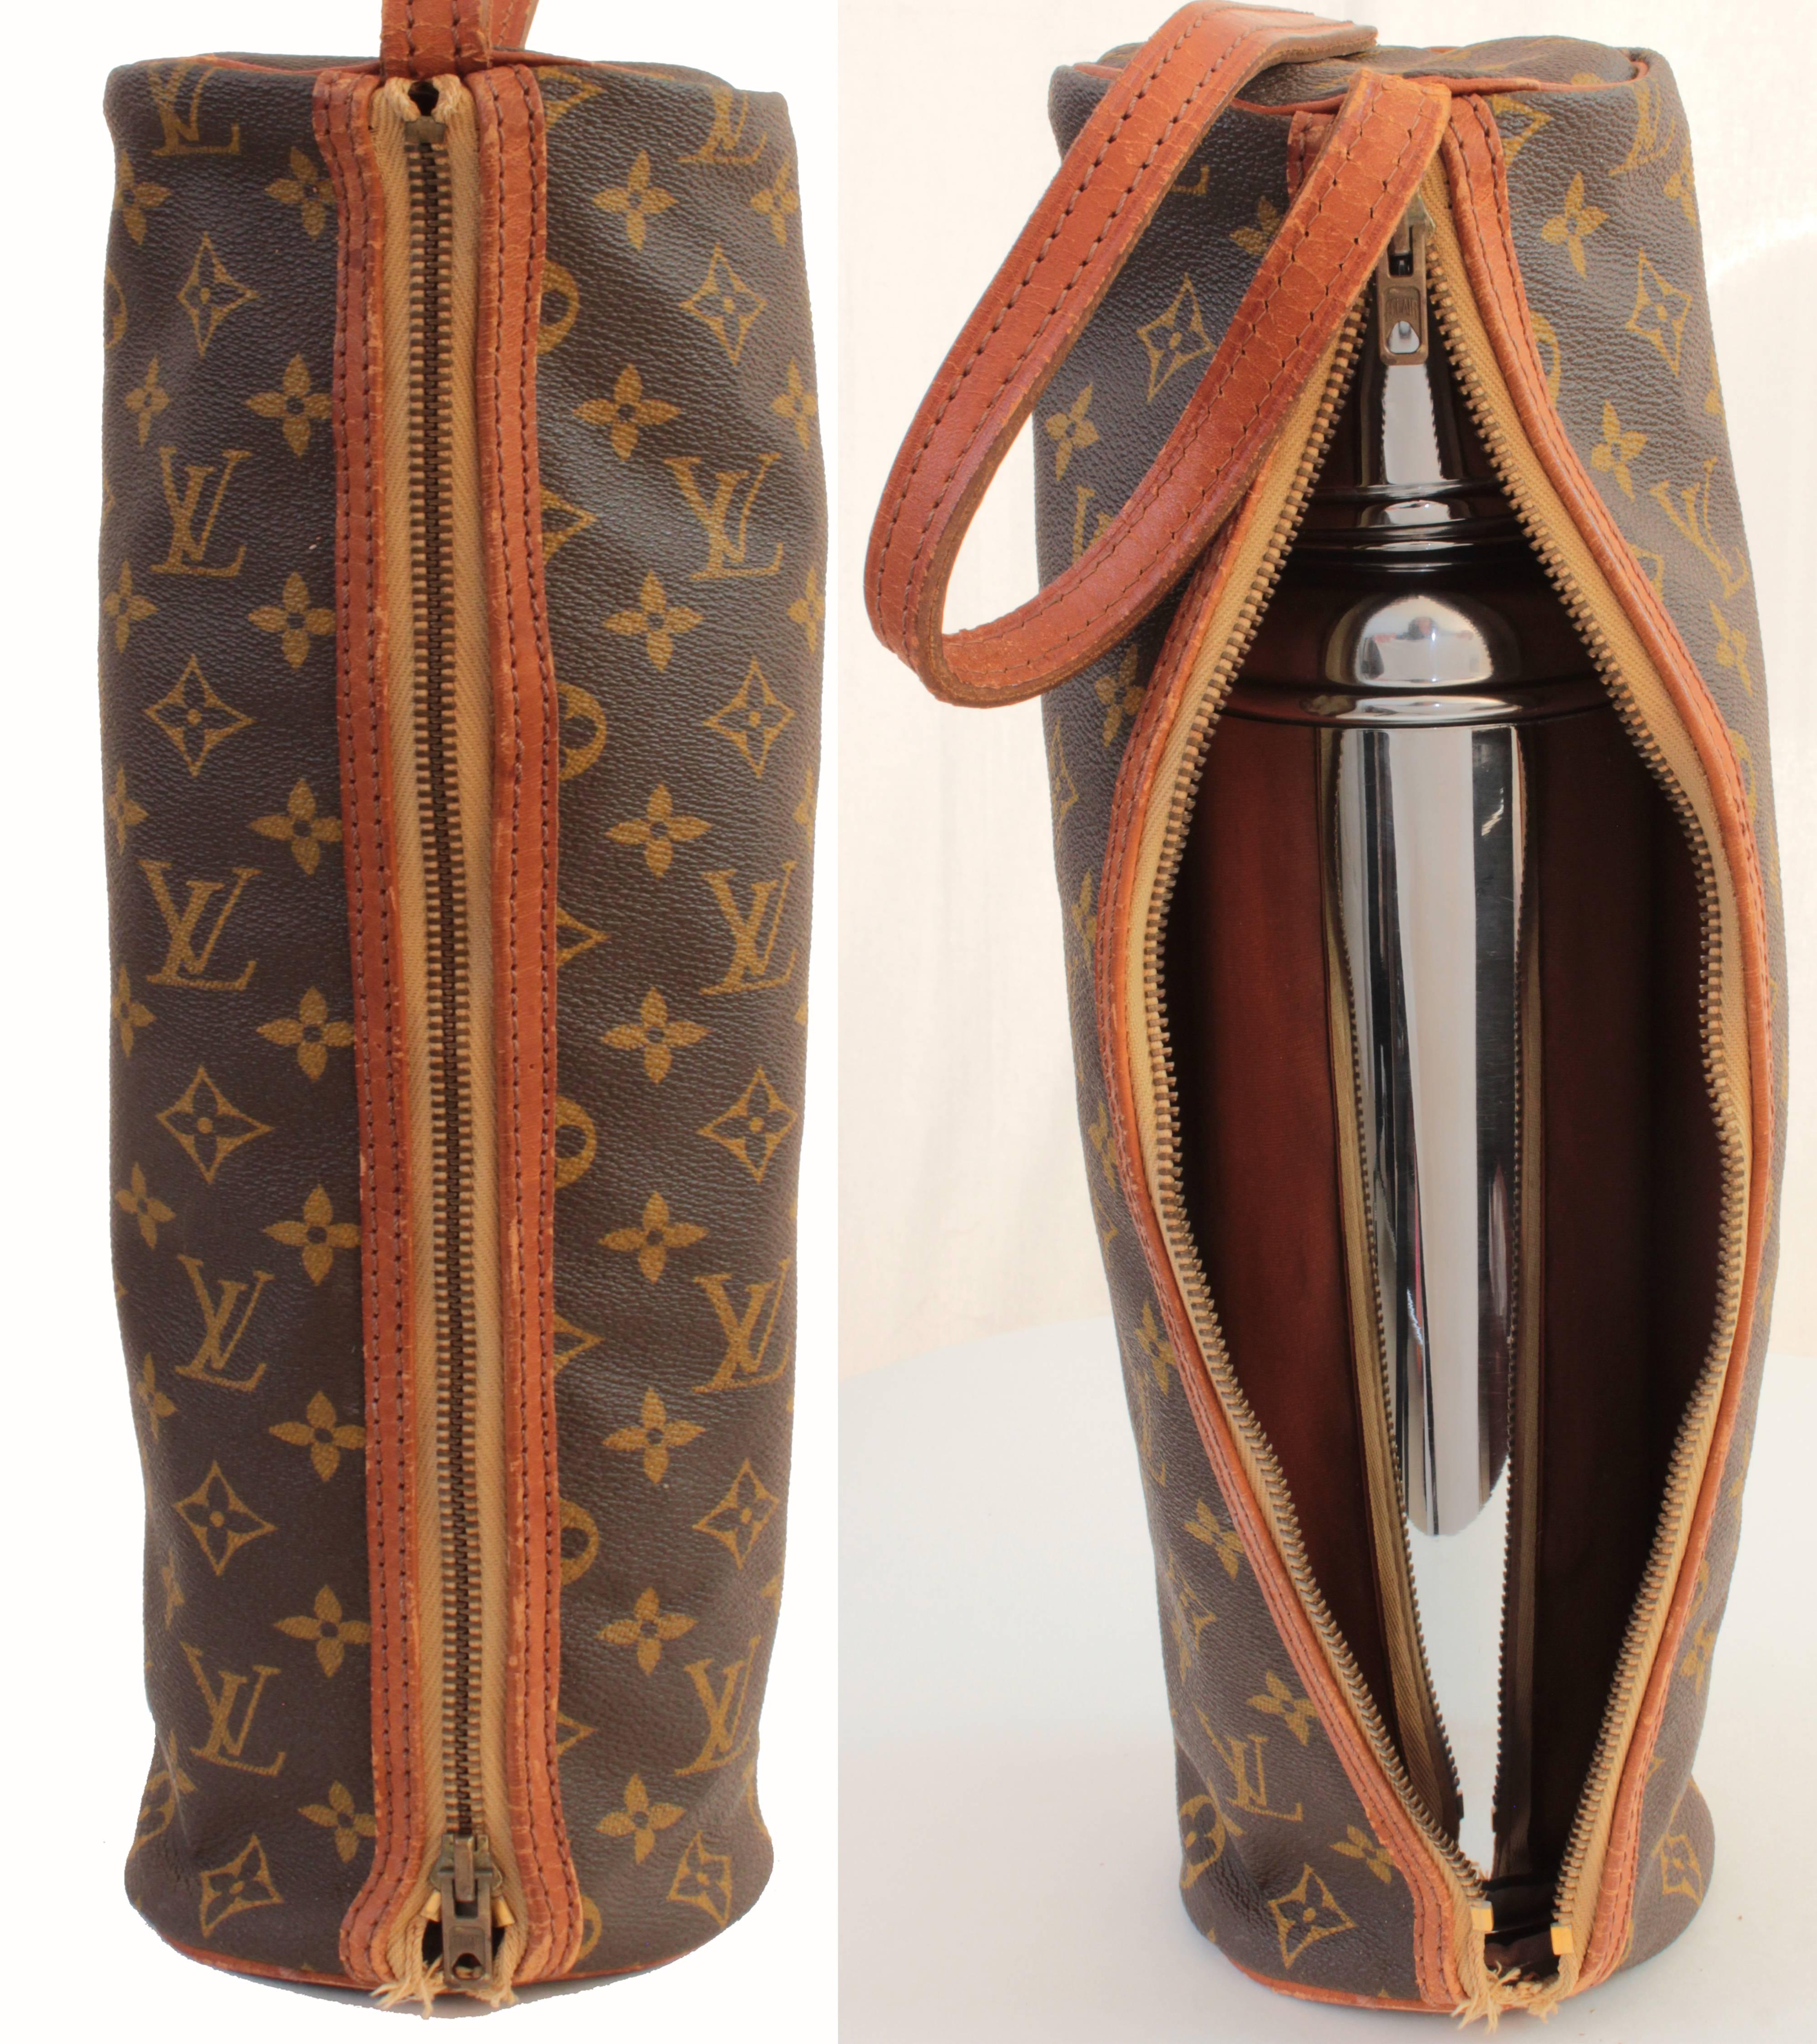 1004 Louis vuitton Flask thermos with temperature display - Fakhra Perfumes